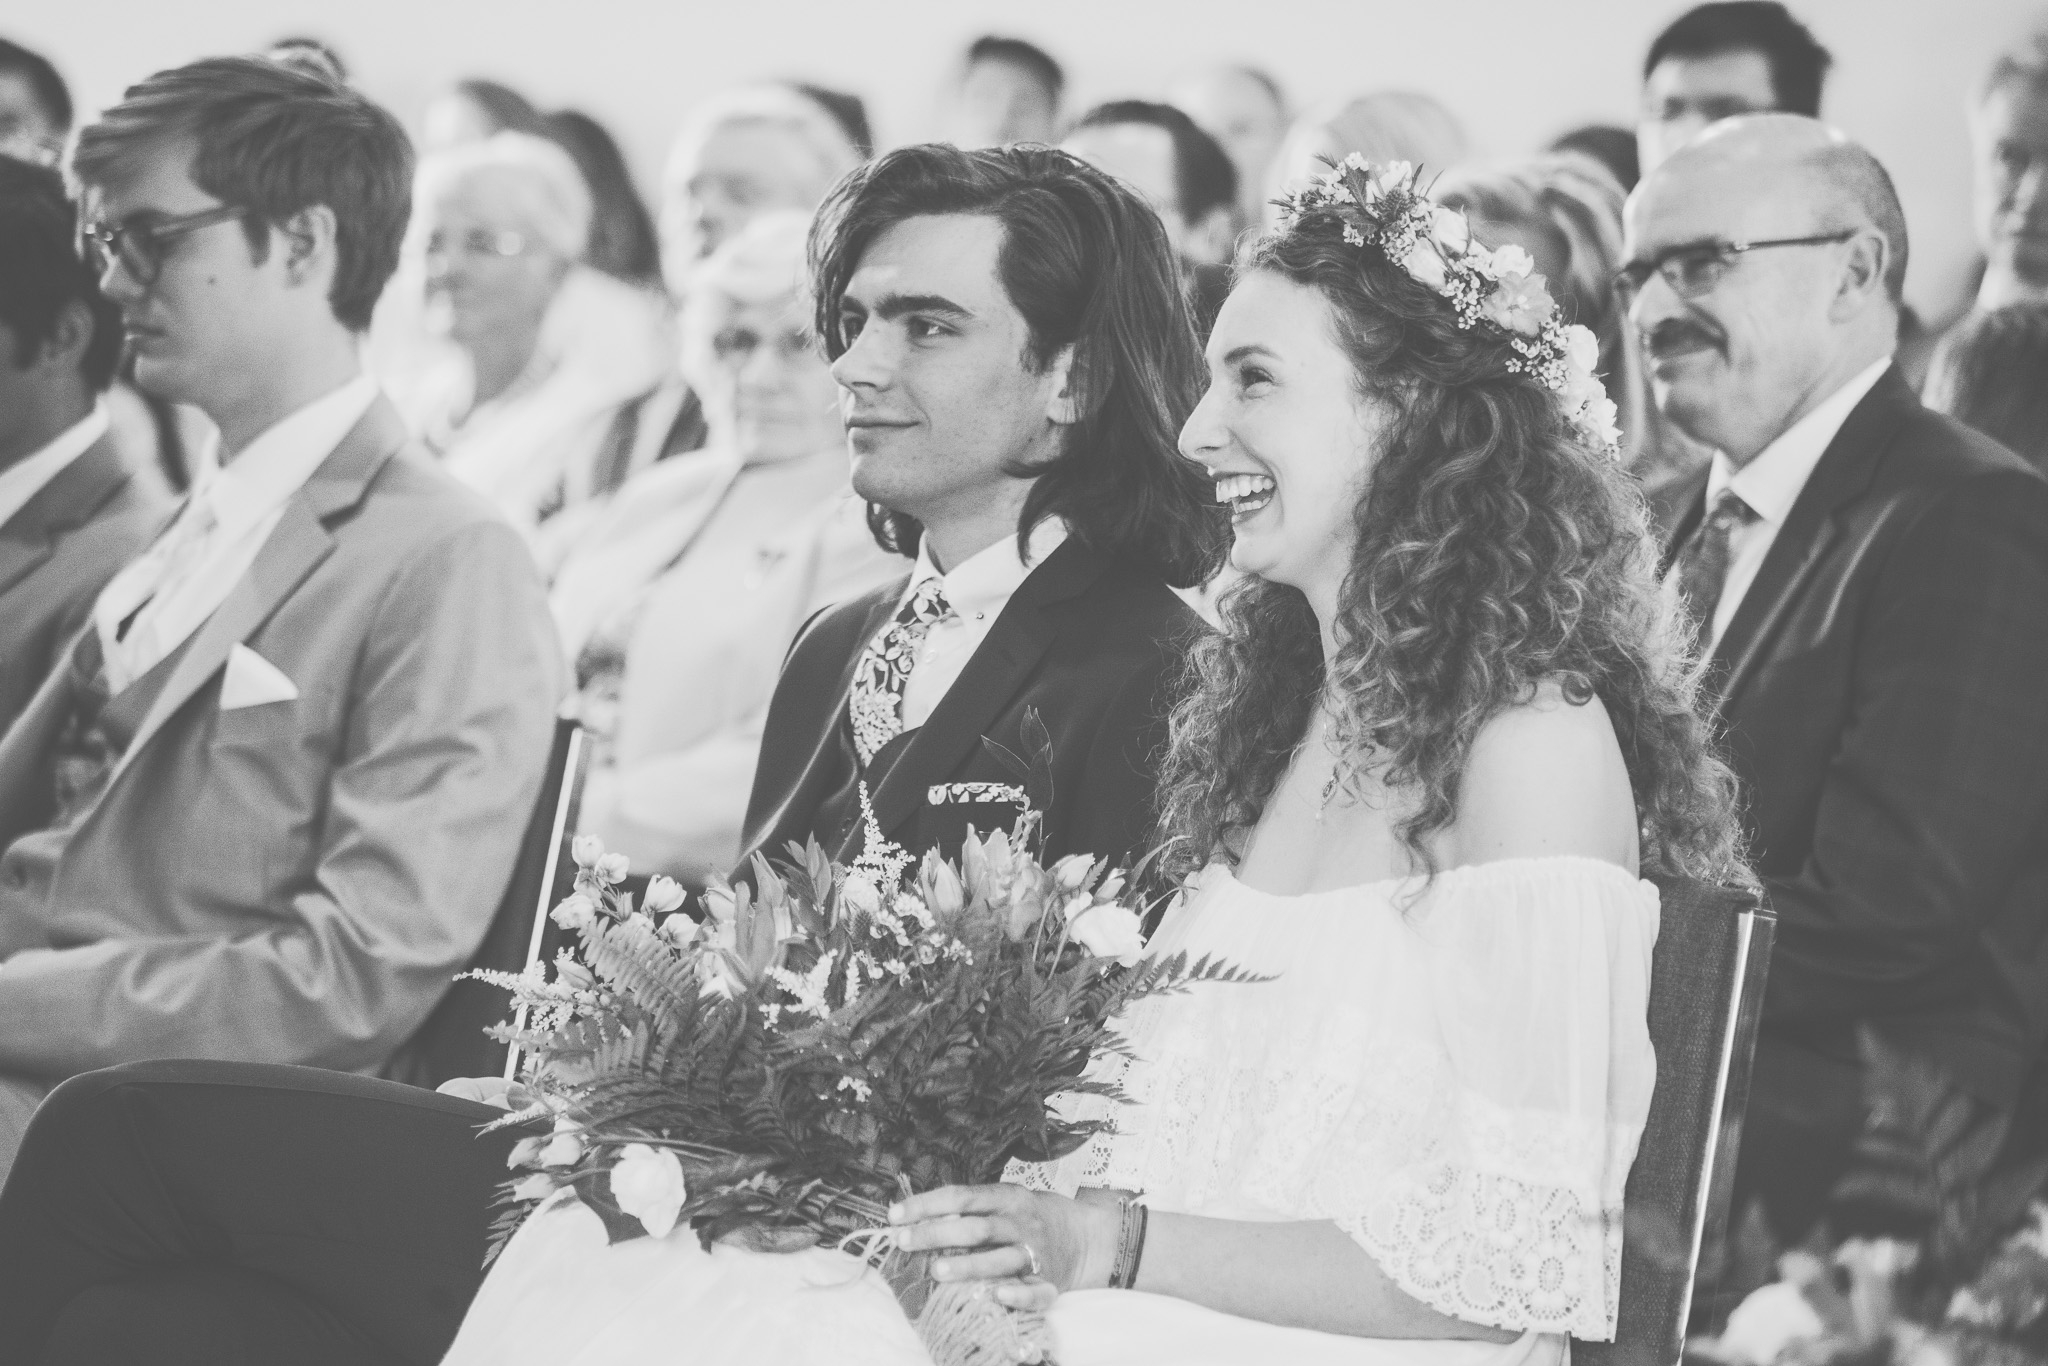 wedding, barrie wedding, barrie photographer, toronto photographer, barrie wedding photographer, toronto wedding photographer, jeannette breward photography, church, church wedding, waterfront, waterfront wedding, spring wedding, ontario wedding, couple, floral crown, religious ceremony, boho bride, boho wedding, bohemian wedding, floral crown, emotional, emotions, emotional wedding, black and white, ceremony, bridesmaids, wedding party, church, ceremony